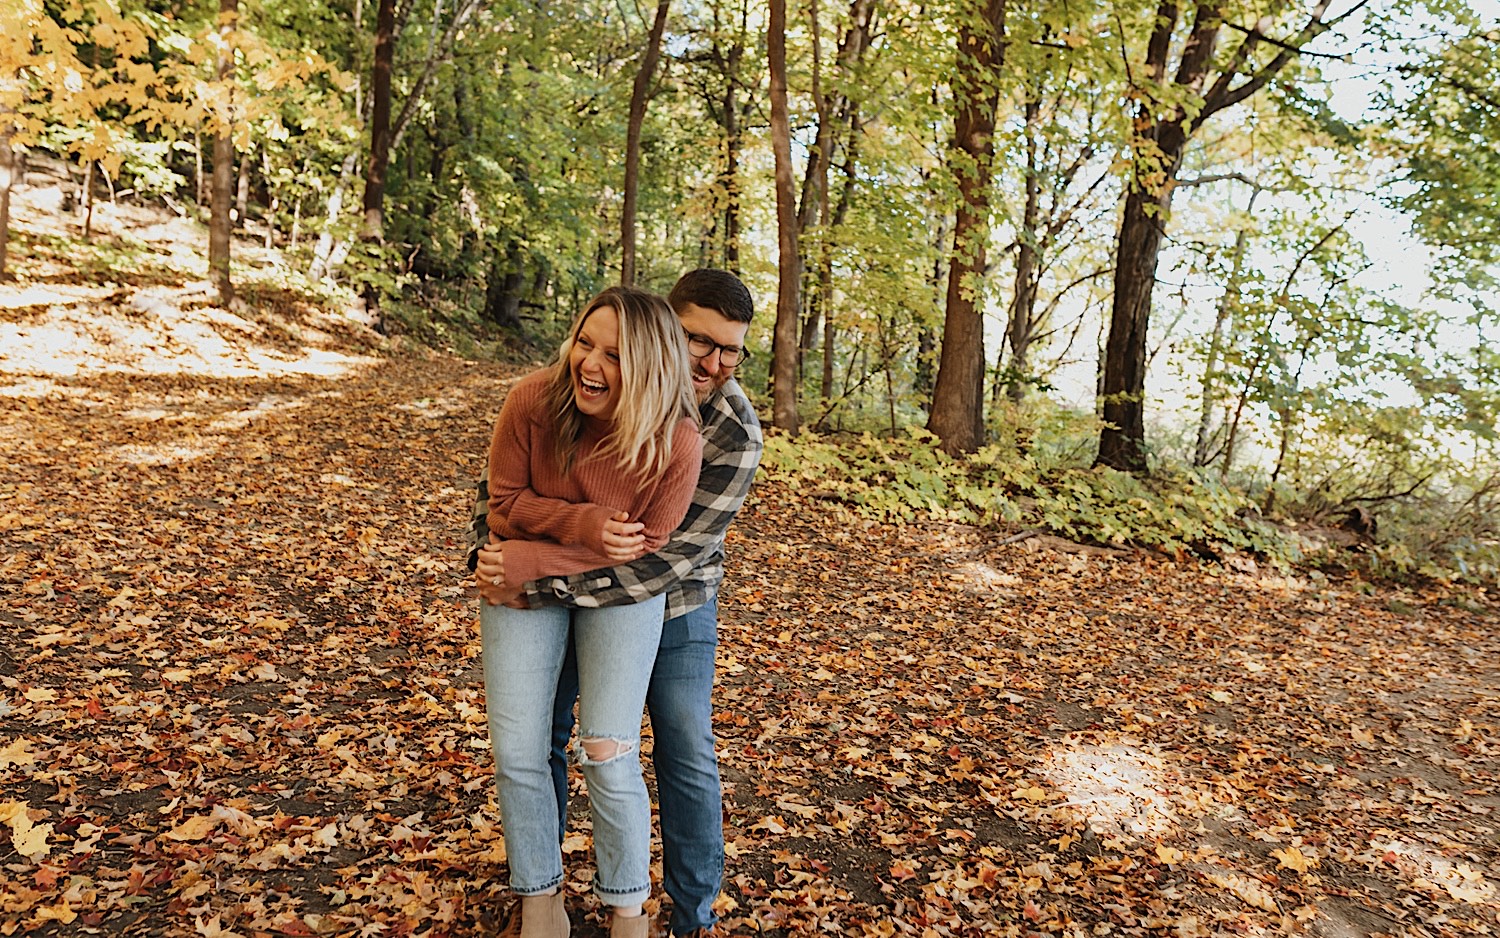 During their fall engagement session in Winona a couple laugh and smile while standing on a leaf covered trail in the forest as the man hugs the woman from behind